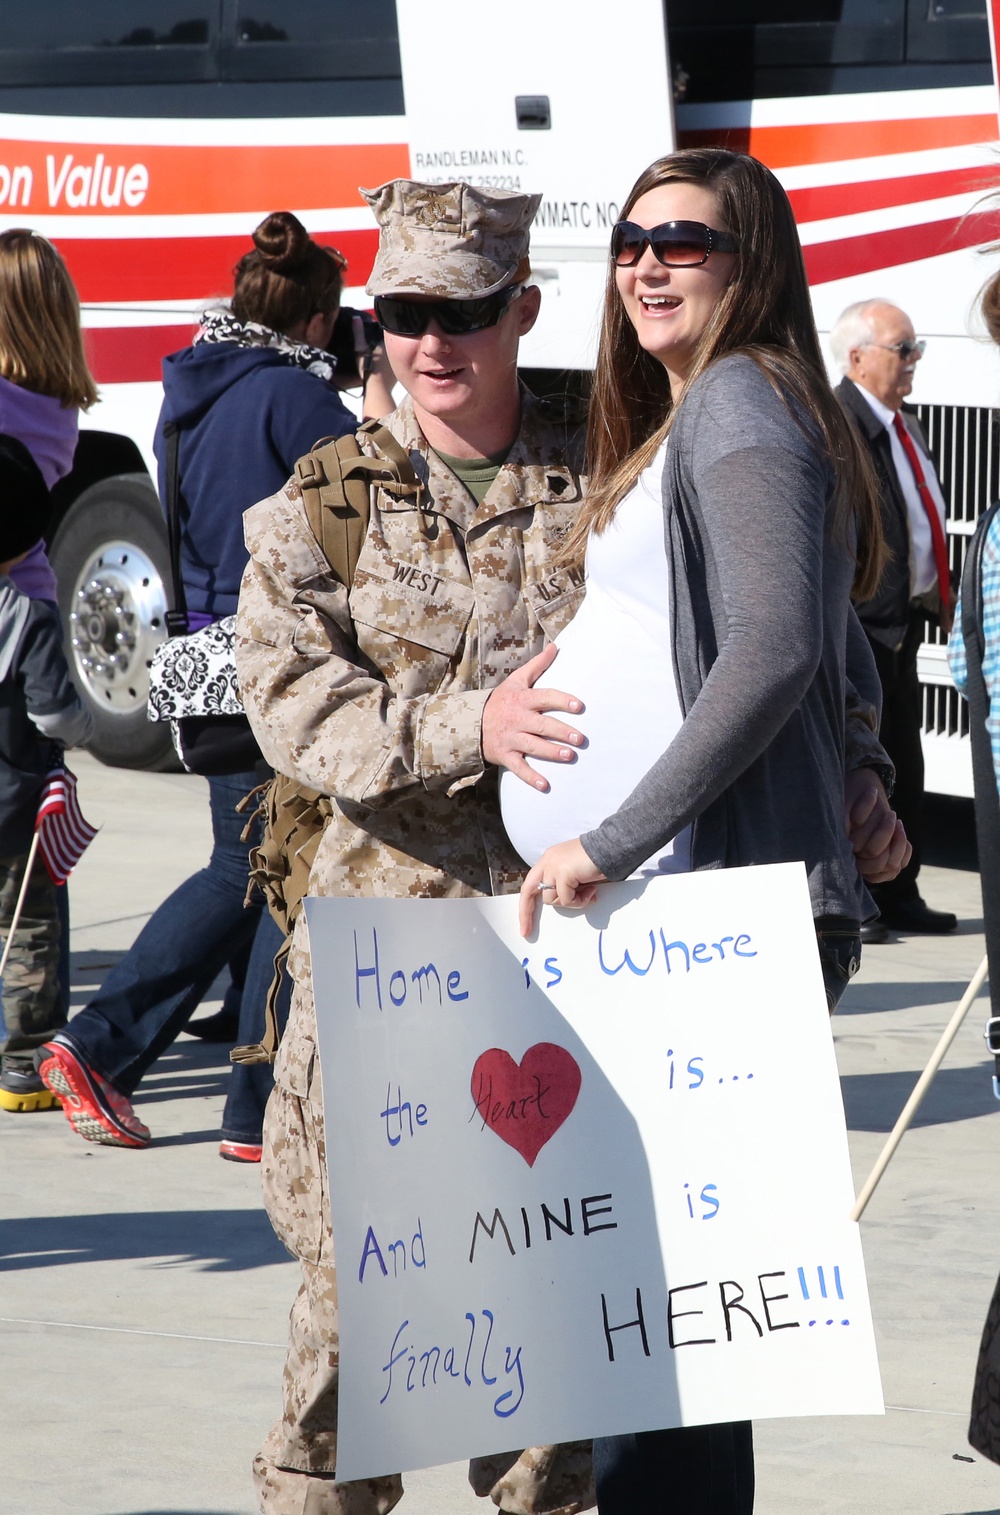 2nd EOD Company Marines, sailors return to loved ones